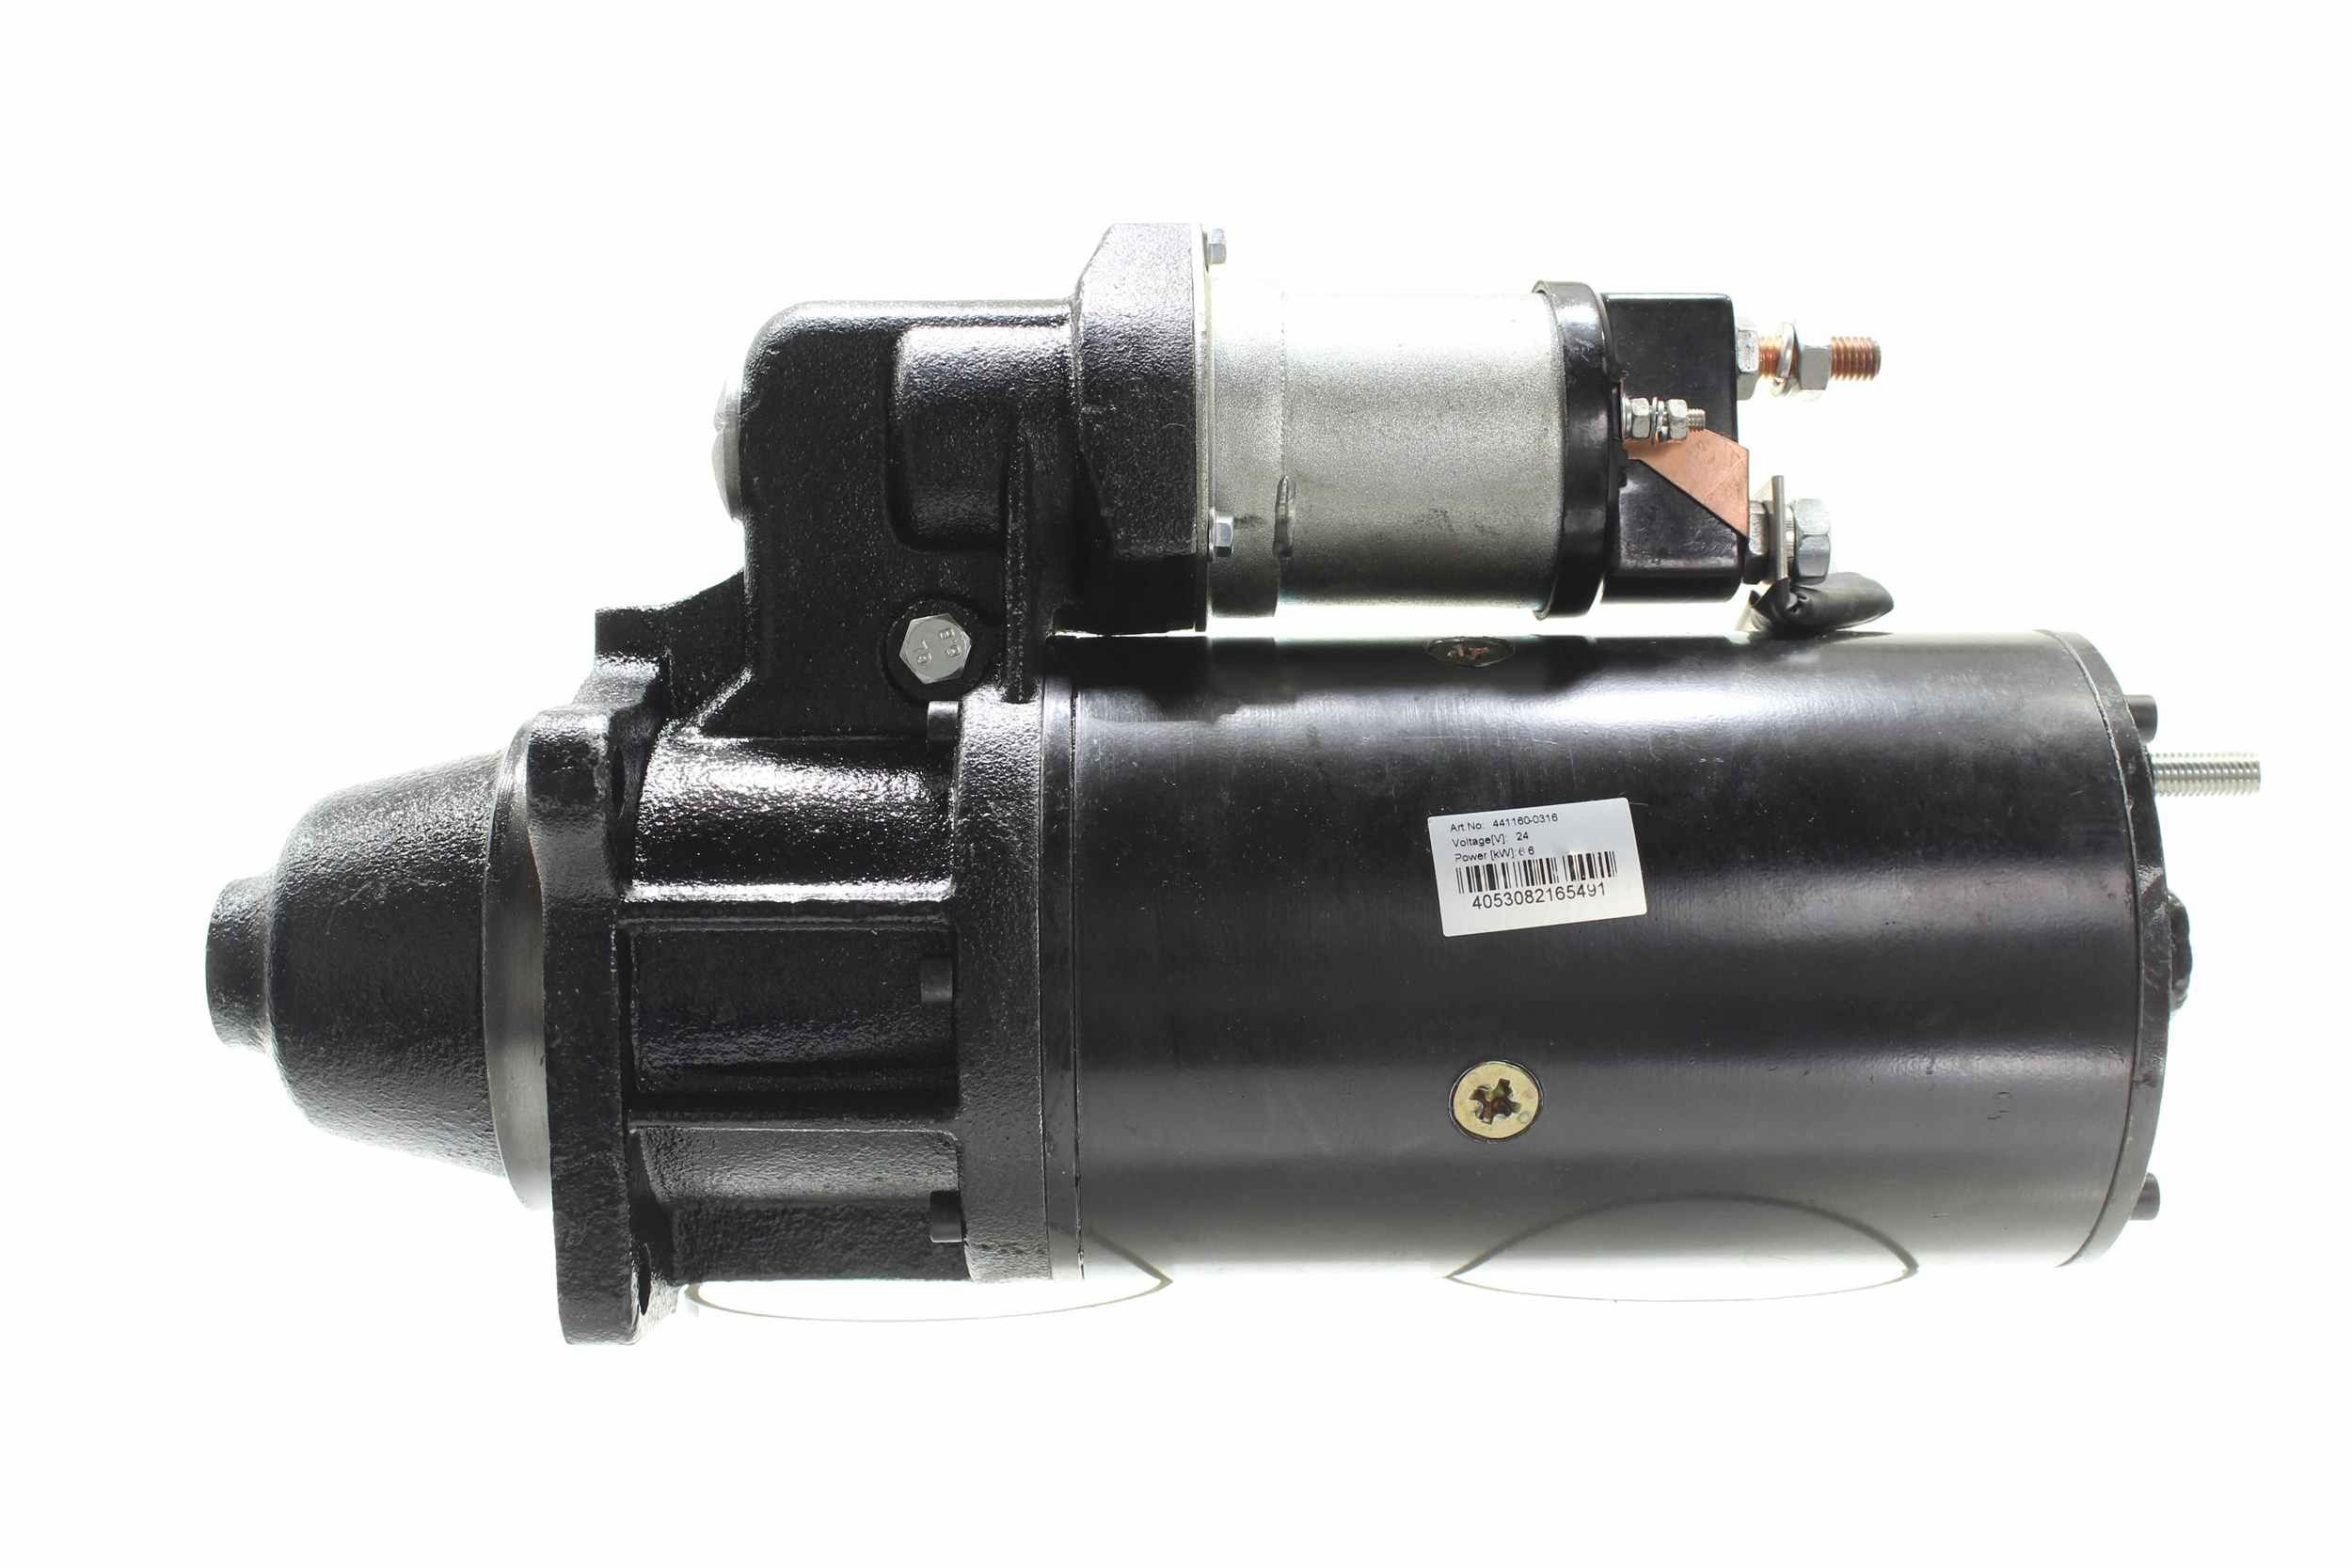 10441160 Engine starter motor ALANKO D13HP607R review and test